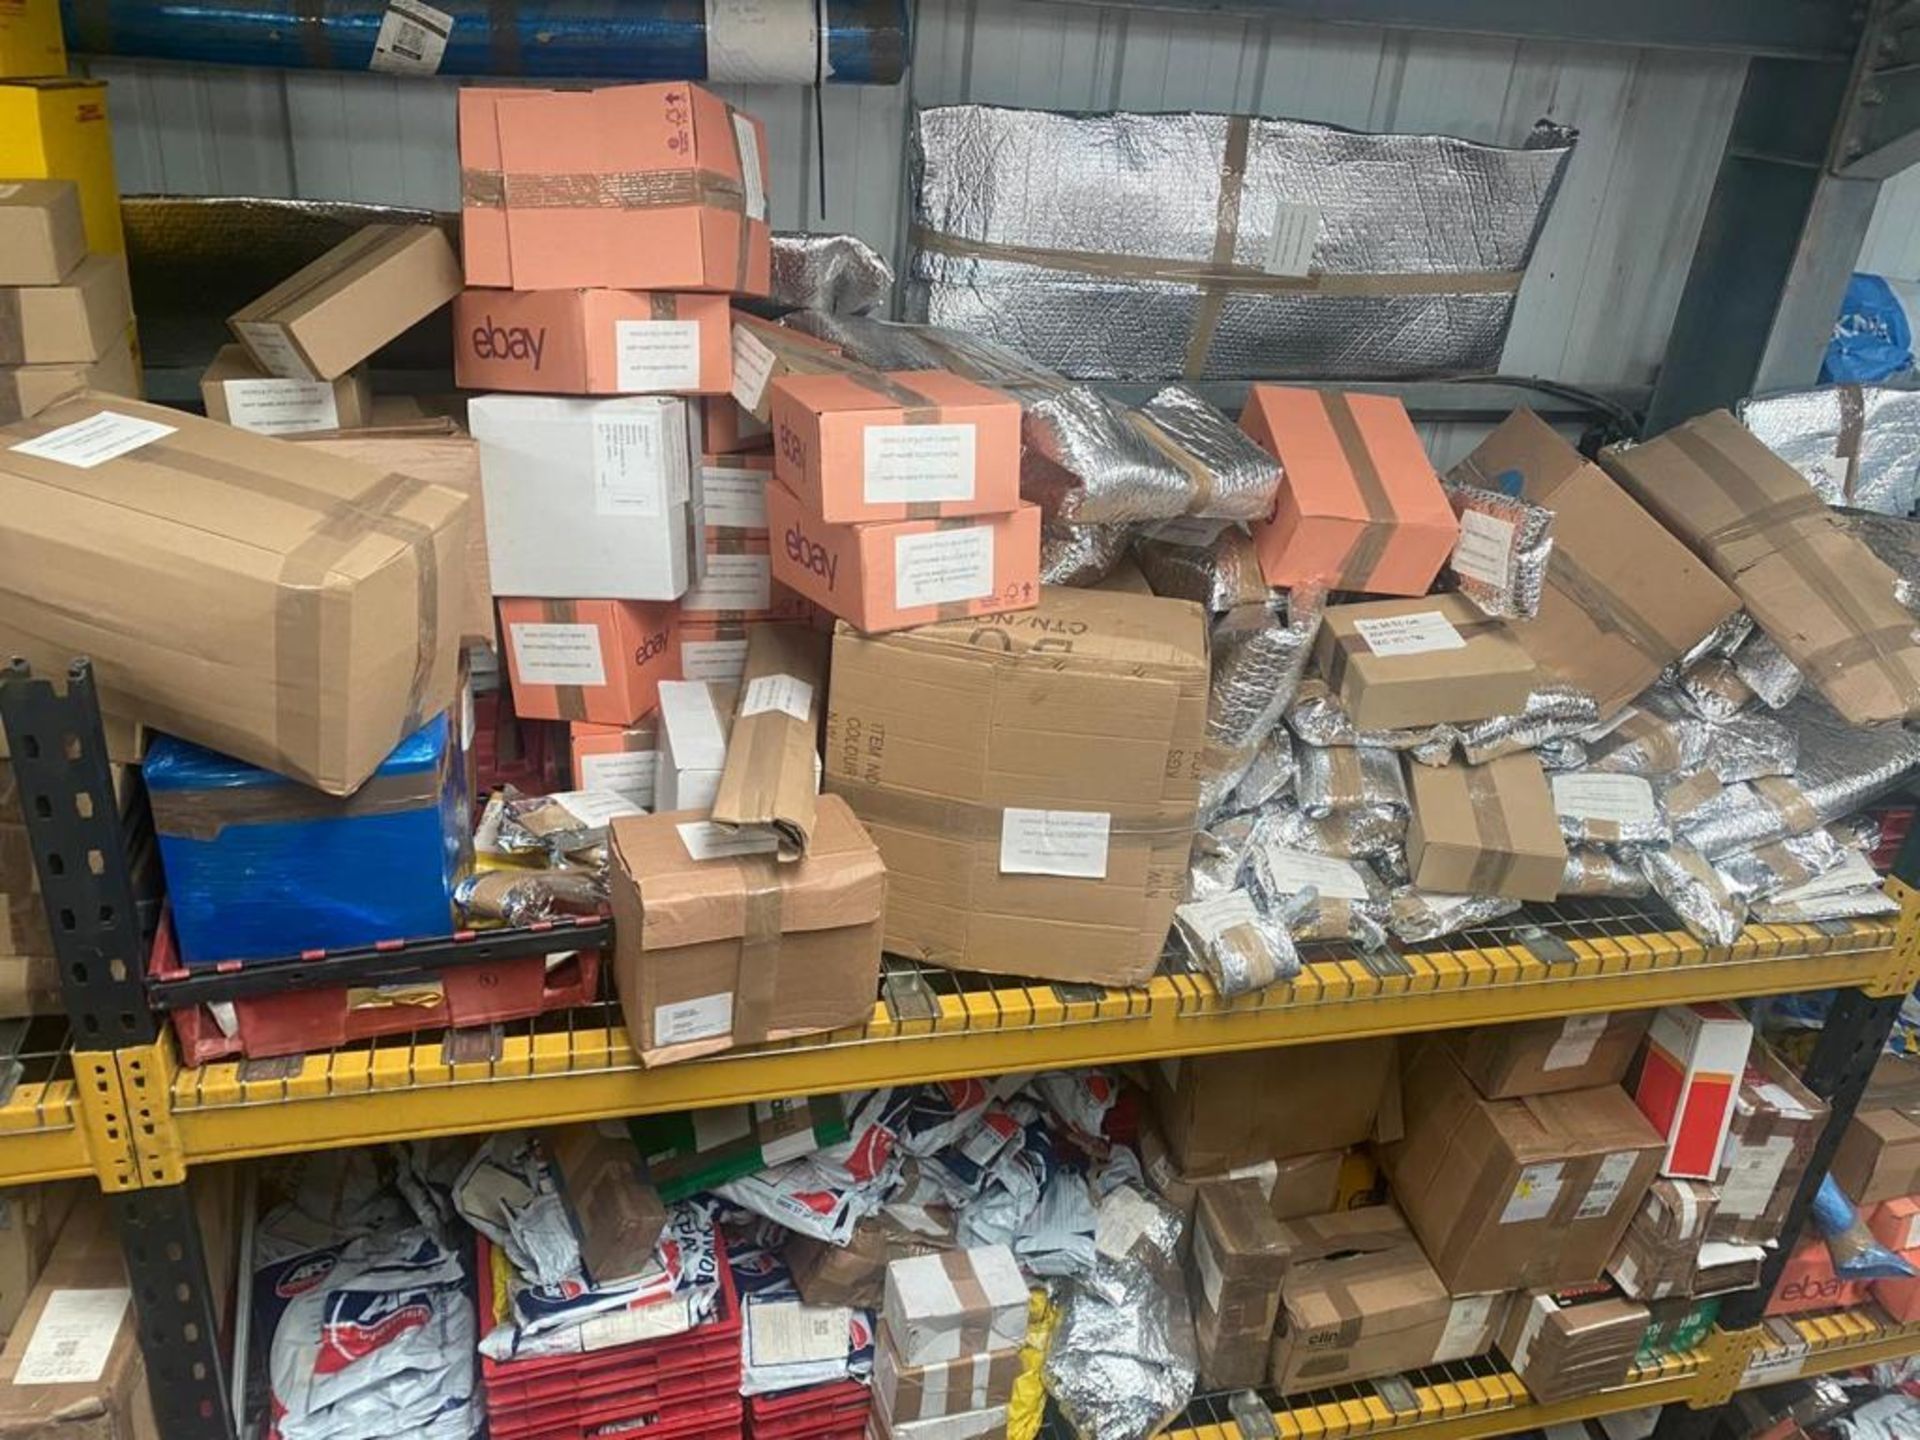 BULK ITEMS JOB LOT OF USED CAR PARTS - £350K ONGOING BUSINESS STOCK CLEARANCE FOR SALE! *NO VAT* - Image 2 of 95